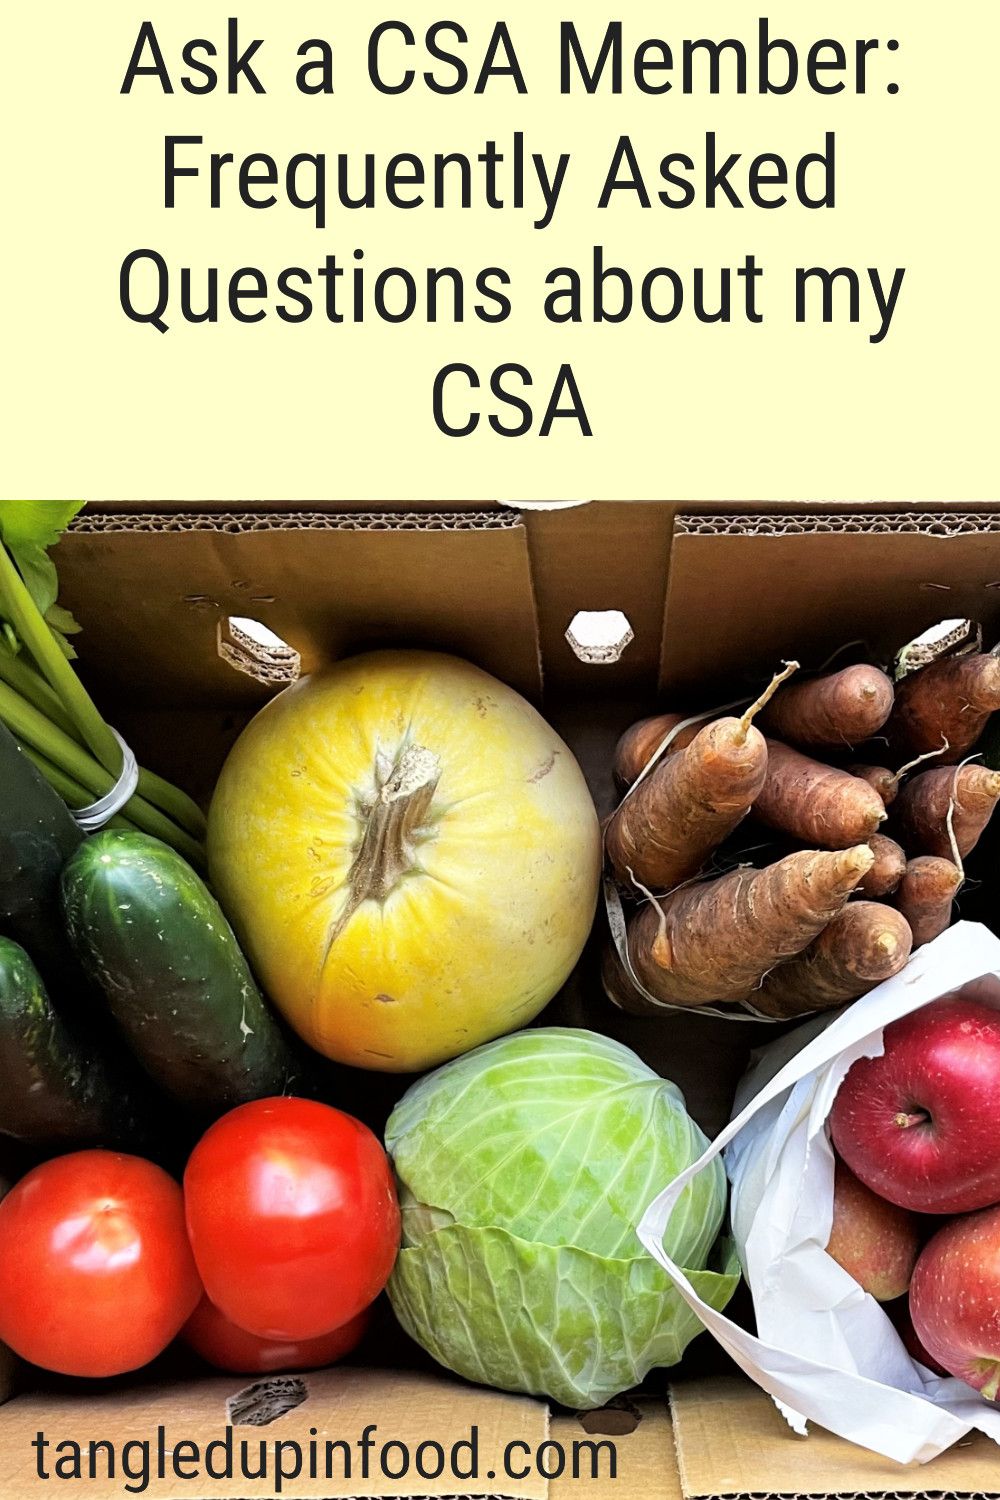 Box of produce with text reading "Ask a CSA member: frequently asked questions about my CSA"